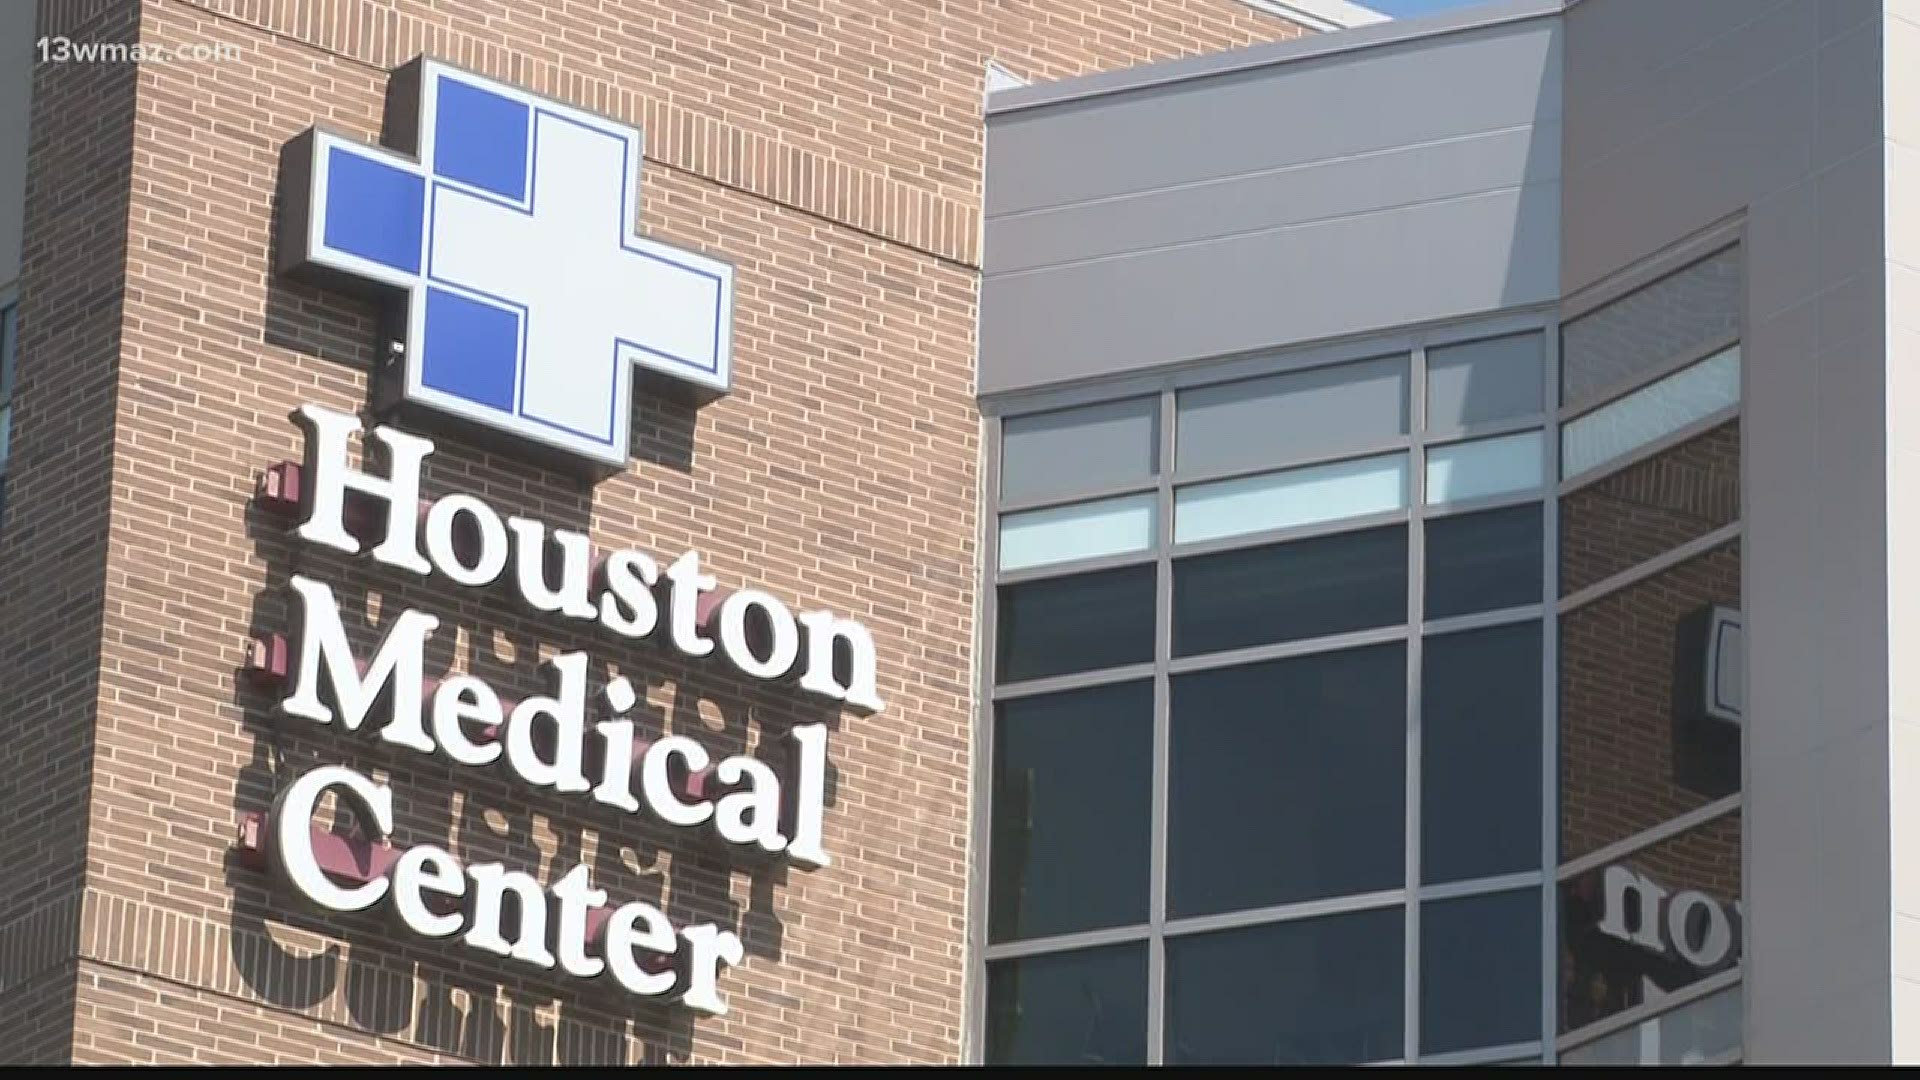 When a Georgia emergency management agency report said critical care beds are at a premium in Bibb, Houston, and some other Central Georgia counties, we took a look.